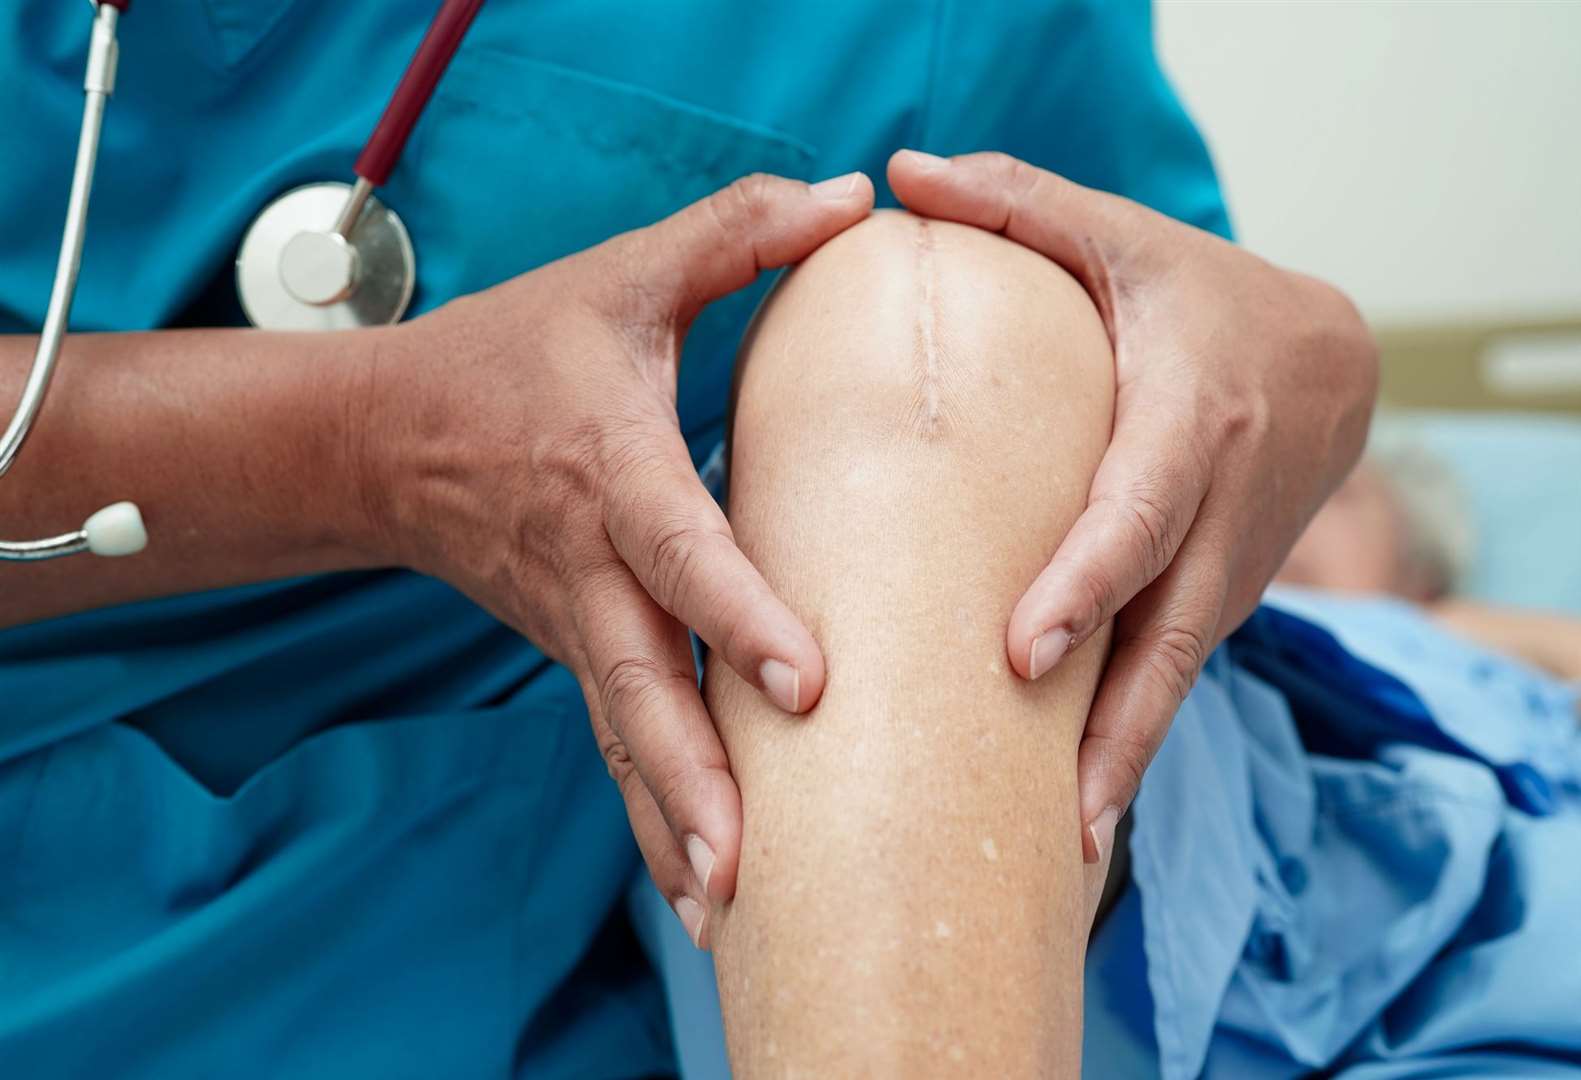 It’s claimed the surgeon billed for more expensive claims after knee surgeries. Picture: Stock